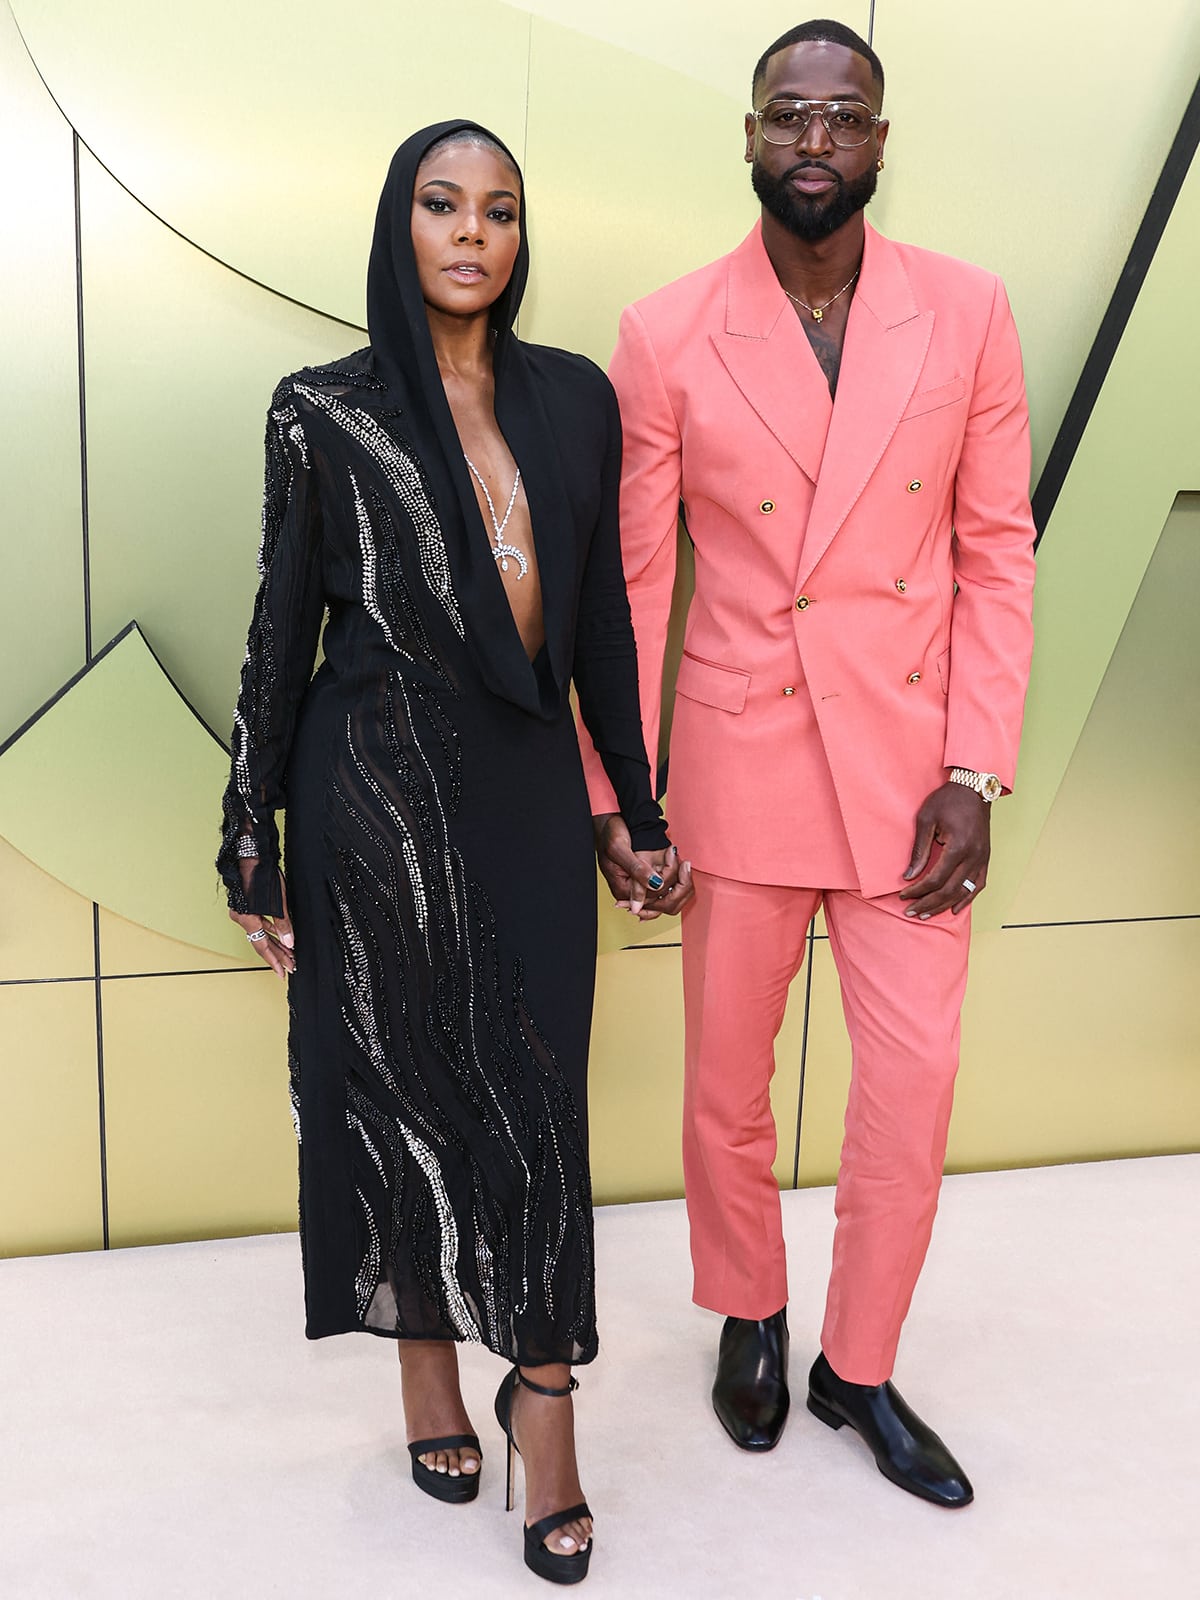 Dwayne Wade joins his wife Gabrielle Union on the red carpet in a salmon pink Versace suit